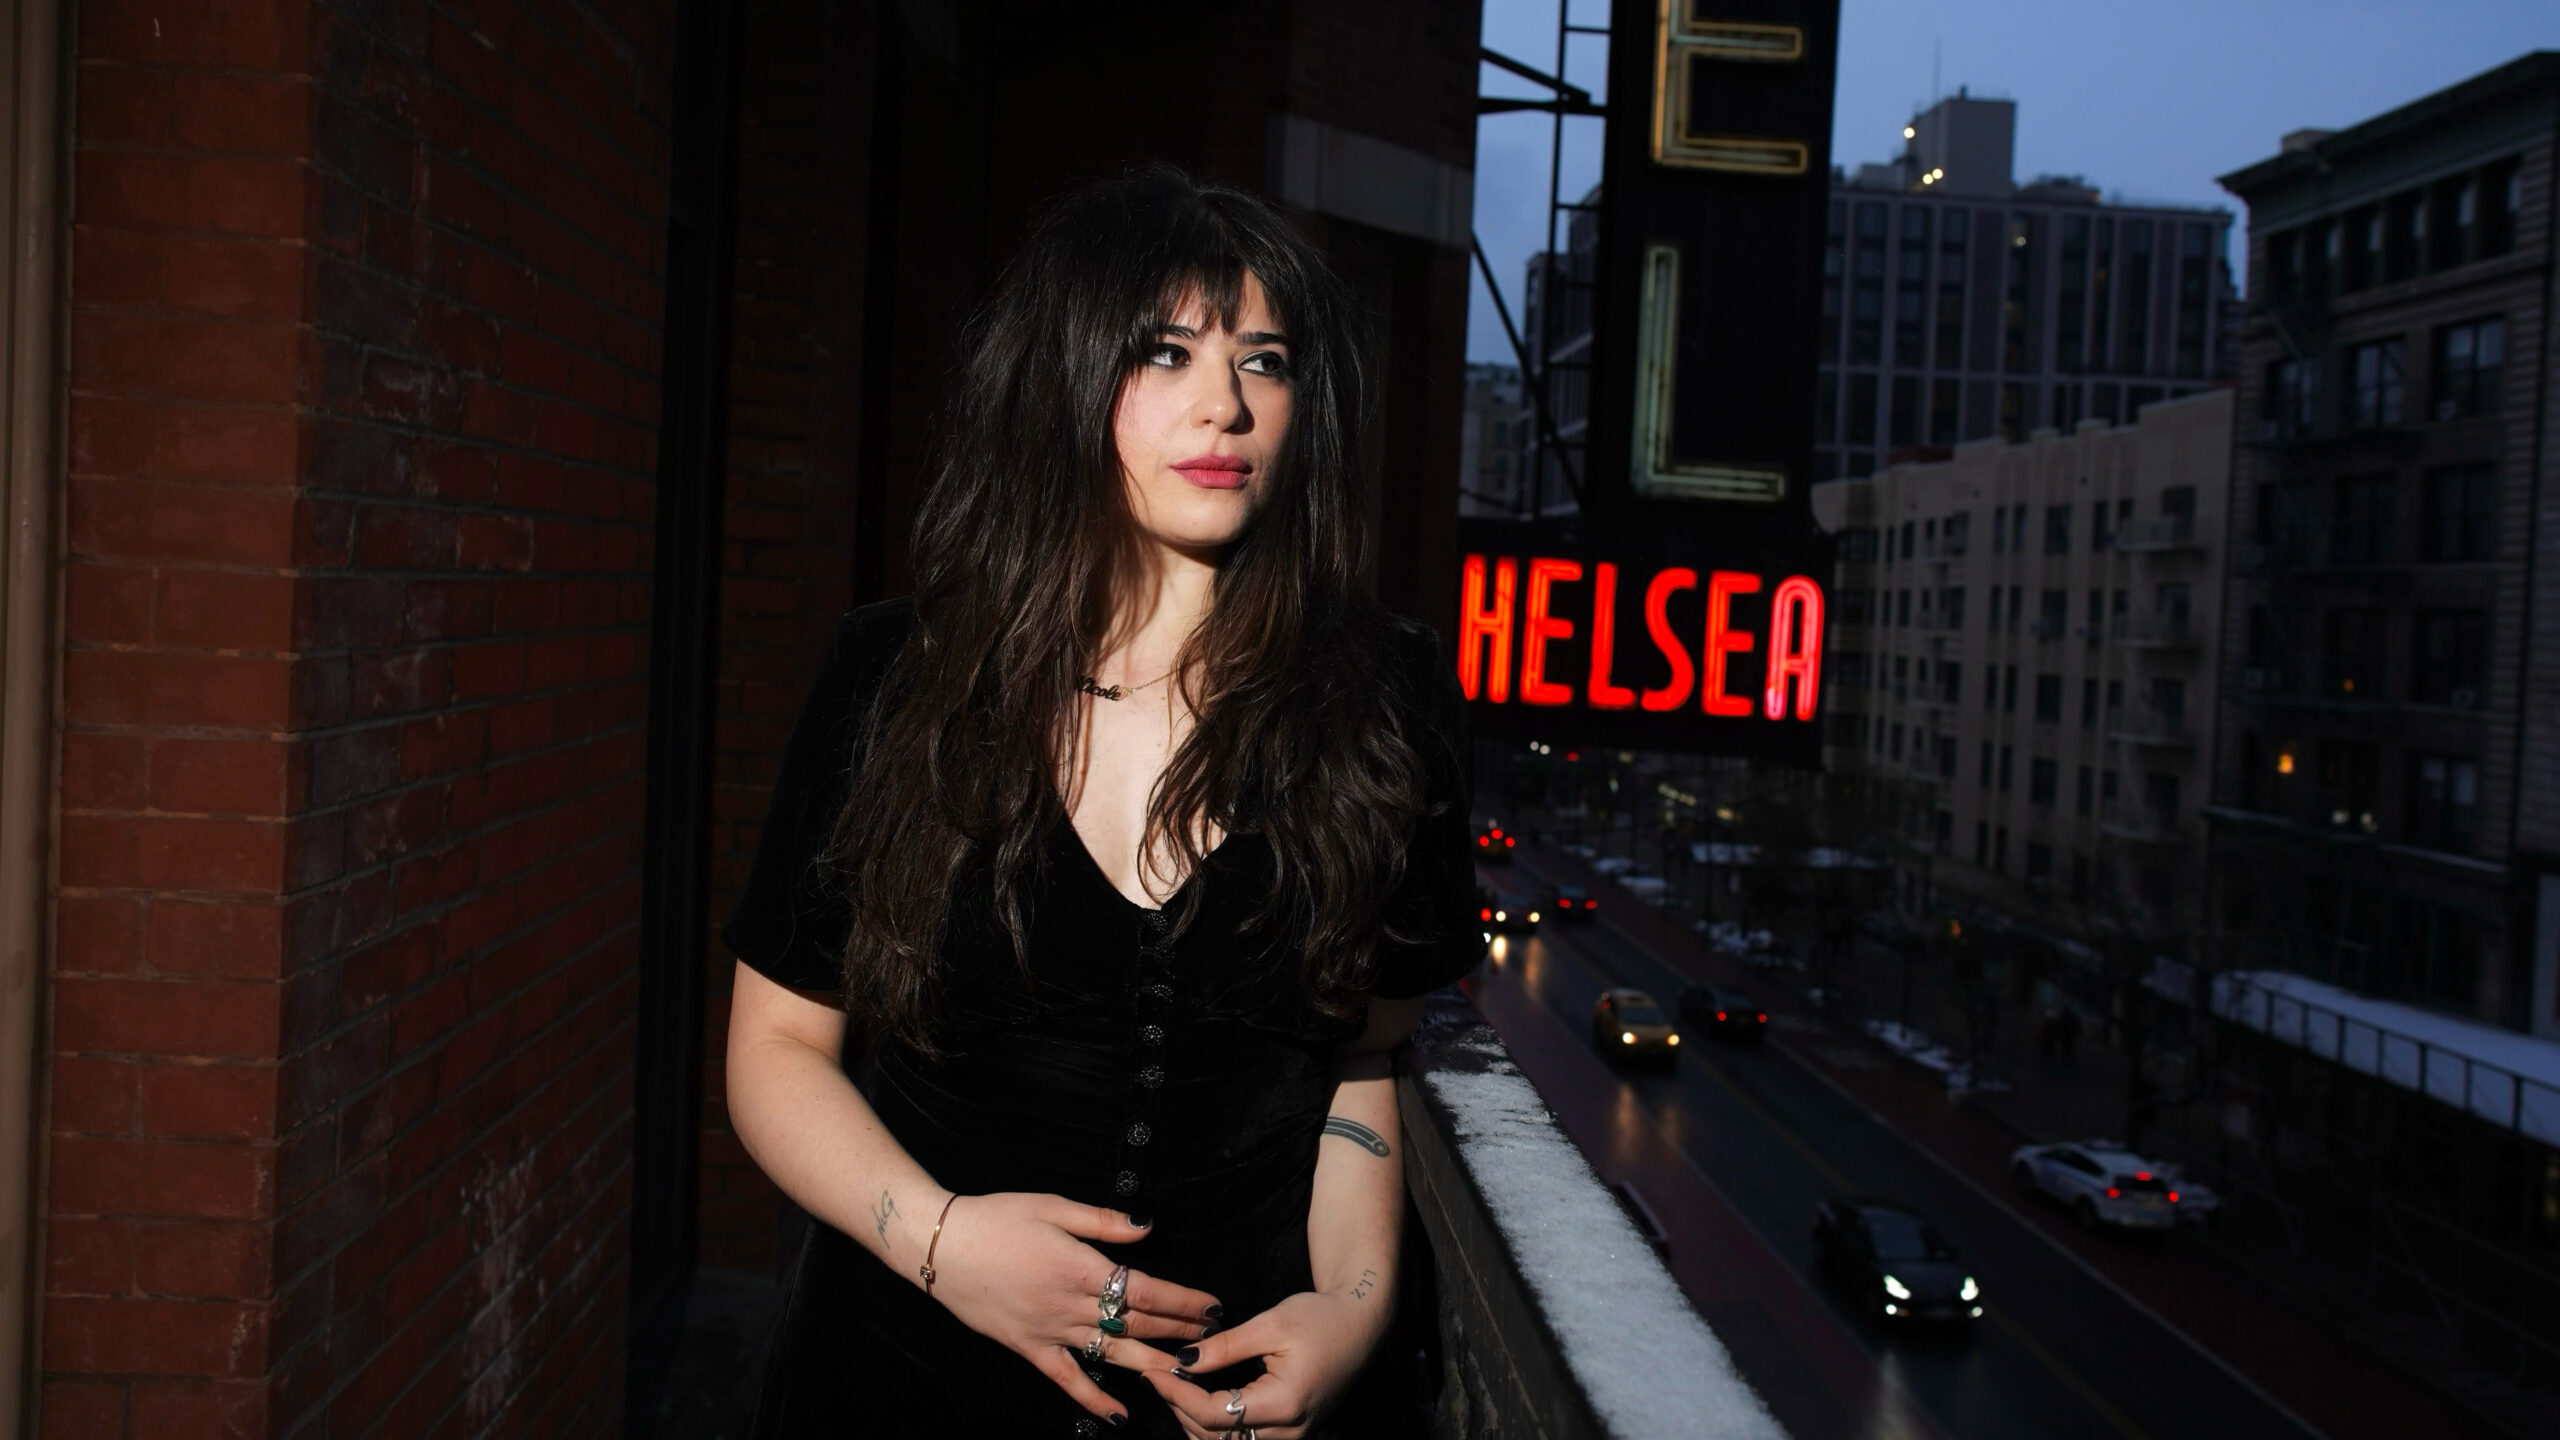 Nicole Galinson poses on a balcony in front of a lit-up red Chelsea sign.